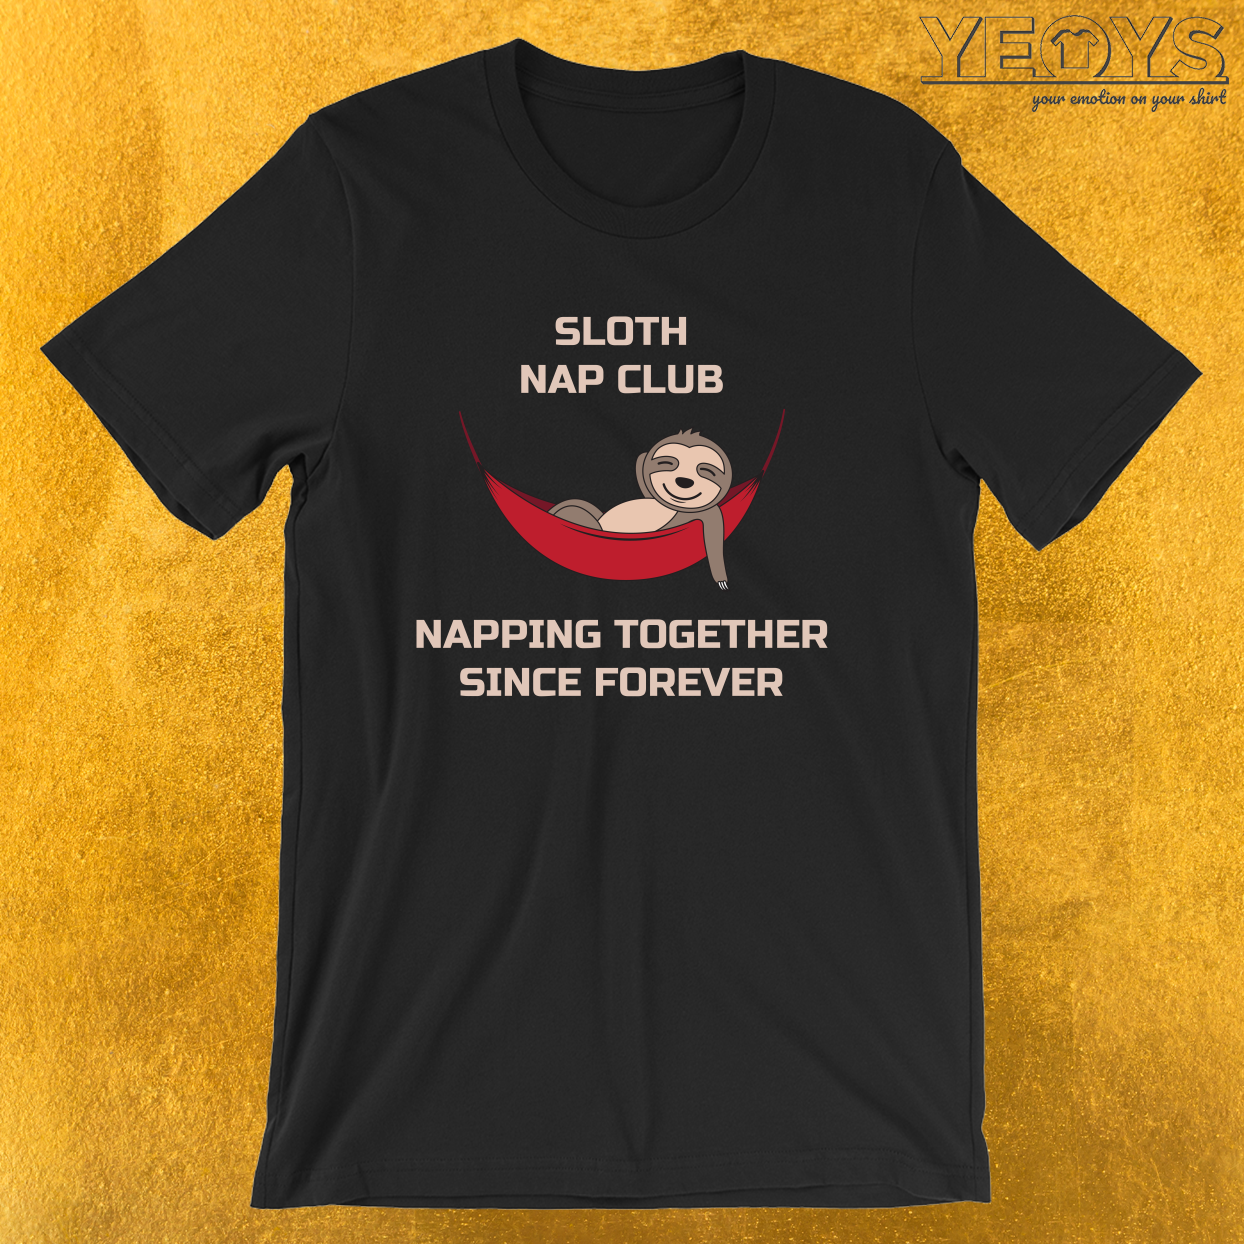 Sloth Nap Club Napping Together – Funny Team Sloth Tee